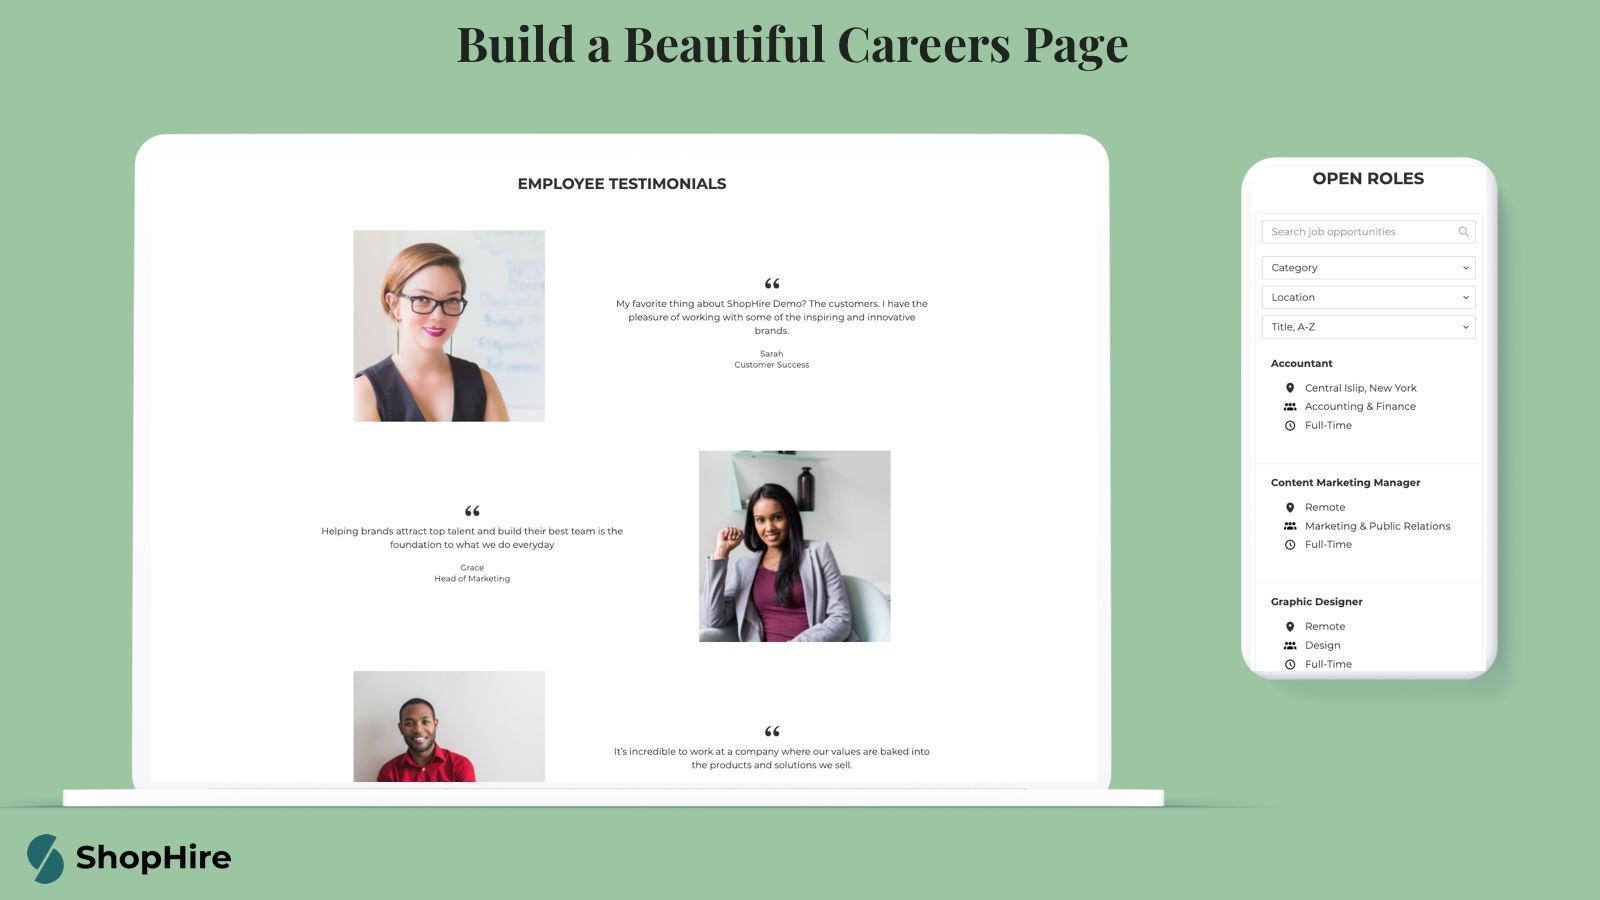 Build a beautiful careers page to attract talent